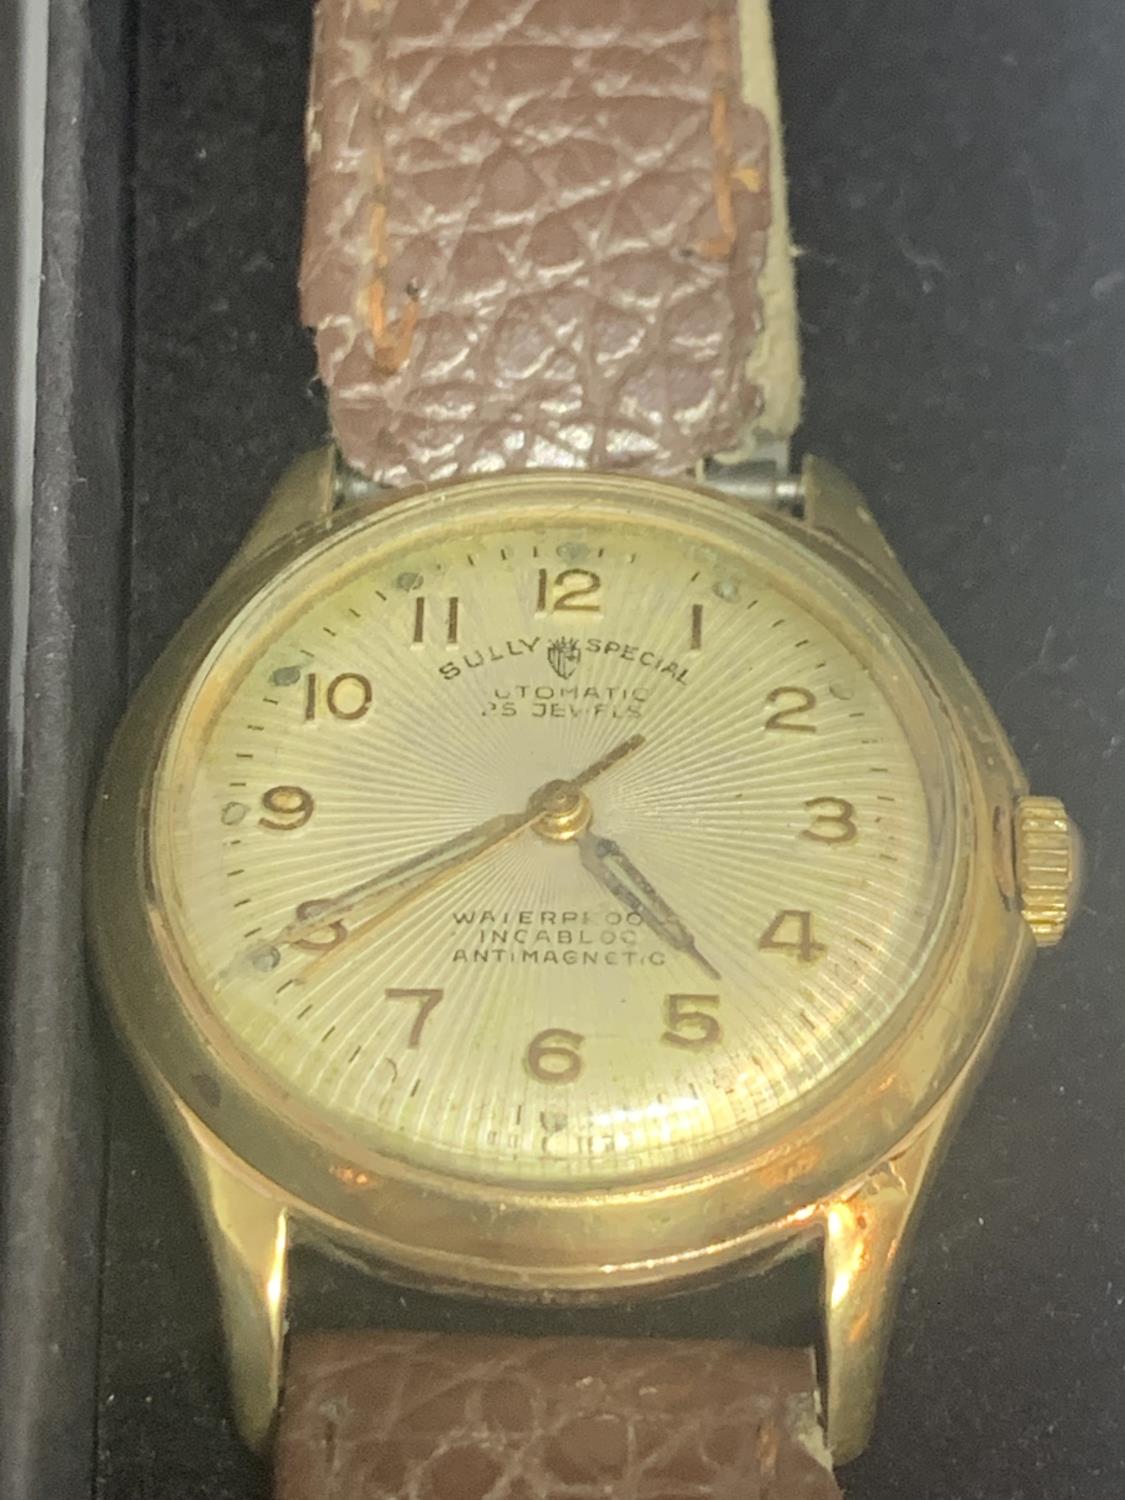 A VINTAGE SULLY SPECIAL 15 JEWEL AUTOMATIC WRIST WATCH WITH BROWN LEATHER STRAP IN A PRESENTATION - Image 2 of 4